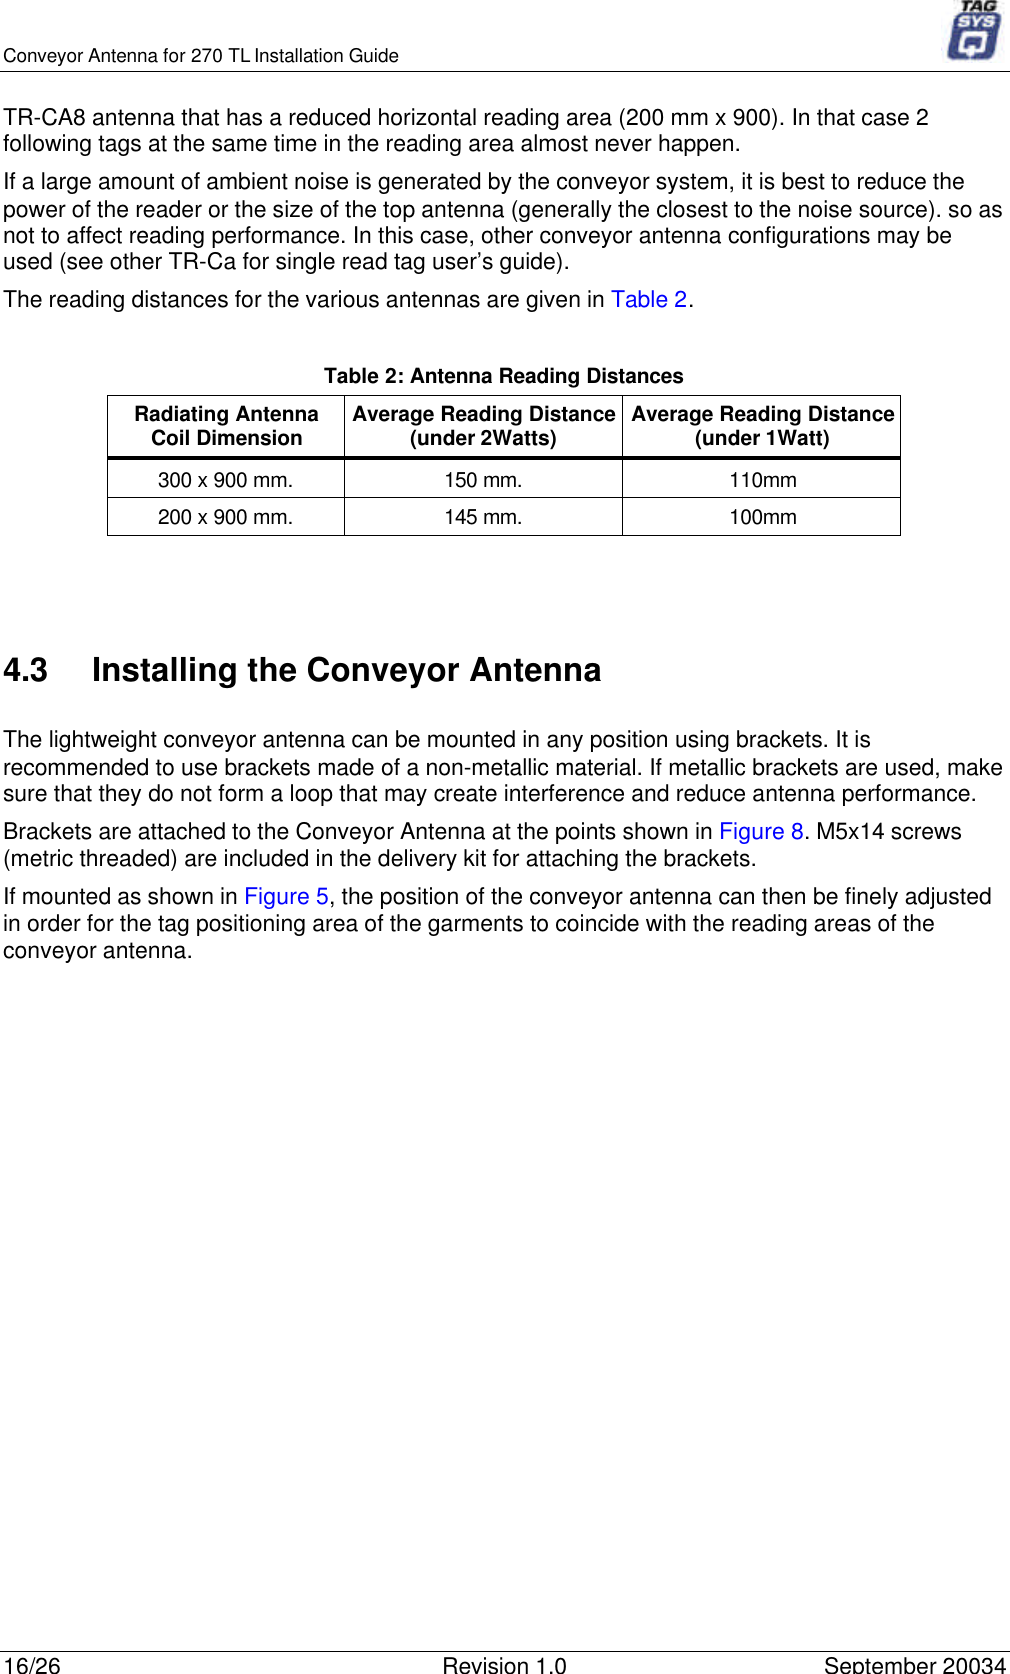 Conveyor Antenna for 270 TL Installation Guide16/26 Revision 1.0 September 20034TR-CA8 antenna that has a reduced horizontal reading area (200 mm x 900). In that case 2following tags at the same time in the reading area almost never happen.If a large amount of ambient noise is generated by the conveyor system, it is best to reduce thepower of the reader or the size of the top antenna (generally the closest to the noise source). so asnot to affect reading performance. In this case, other conveyor antenna configurations may beused (see other TR-Ca for single read tag user’s guide).The reading distances for the various antennas are given in Table 2.Table 2: Antenna Reading DistancesRadiating AntennaCoil Dimension Average Reading Distance(under 2Watts) Average Reading Distance(under 1Watt)300 x 900 mm. 150 mm. 110mm200 x 900 mm. 145 mm. 100mm4.3 Installing the Conveyor AntennaThe lightweight conveyor antenna can be mounted in any position using brackets. It isrecommended to use brackets made of a non-metallic material. If metallic brackets are used, makesure that they do not form a loop that may create interference and reduce antenna performance.Brackets are attached to the Conveyor Antenna at the points shown in Figure 8. M5x14 screws(metric threaded) are included in the delivery kit for attaching the brackets.If mounted as shown in Figure 5, the position of the conveyor antenna can then be finely adjustedin order for the tag positioning area of the garments to coincide with the reading areas of theconveyor antenna.